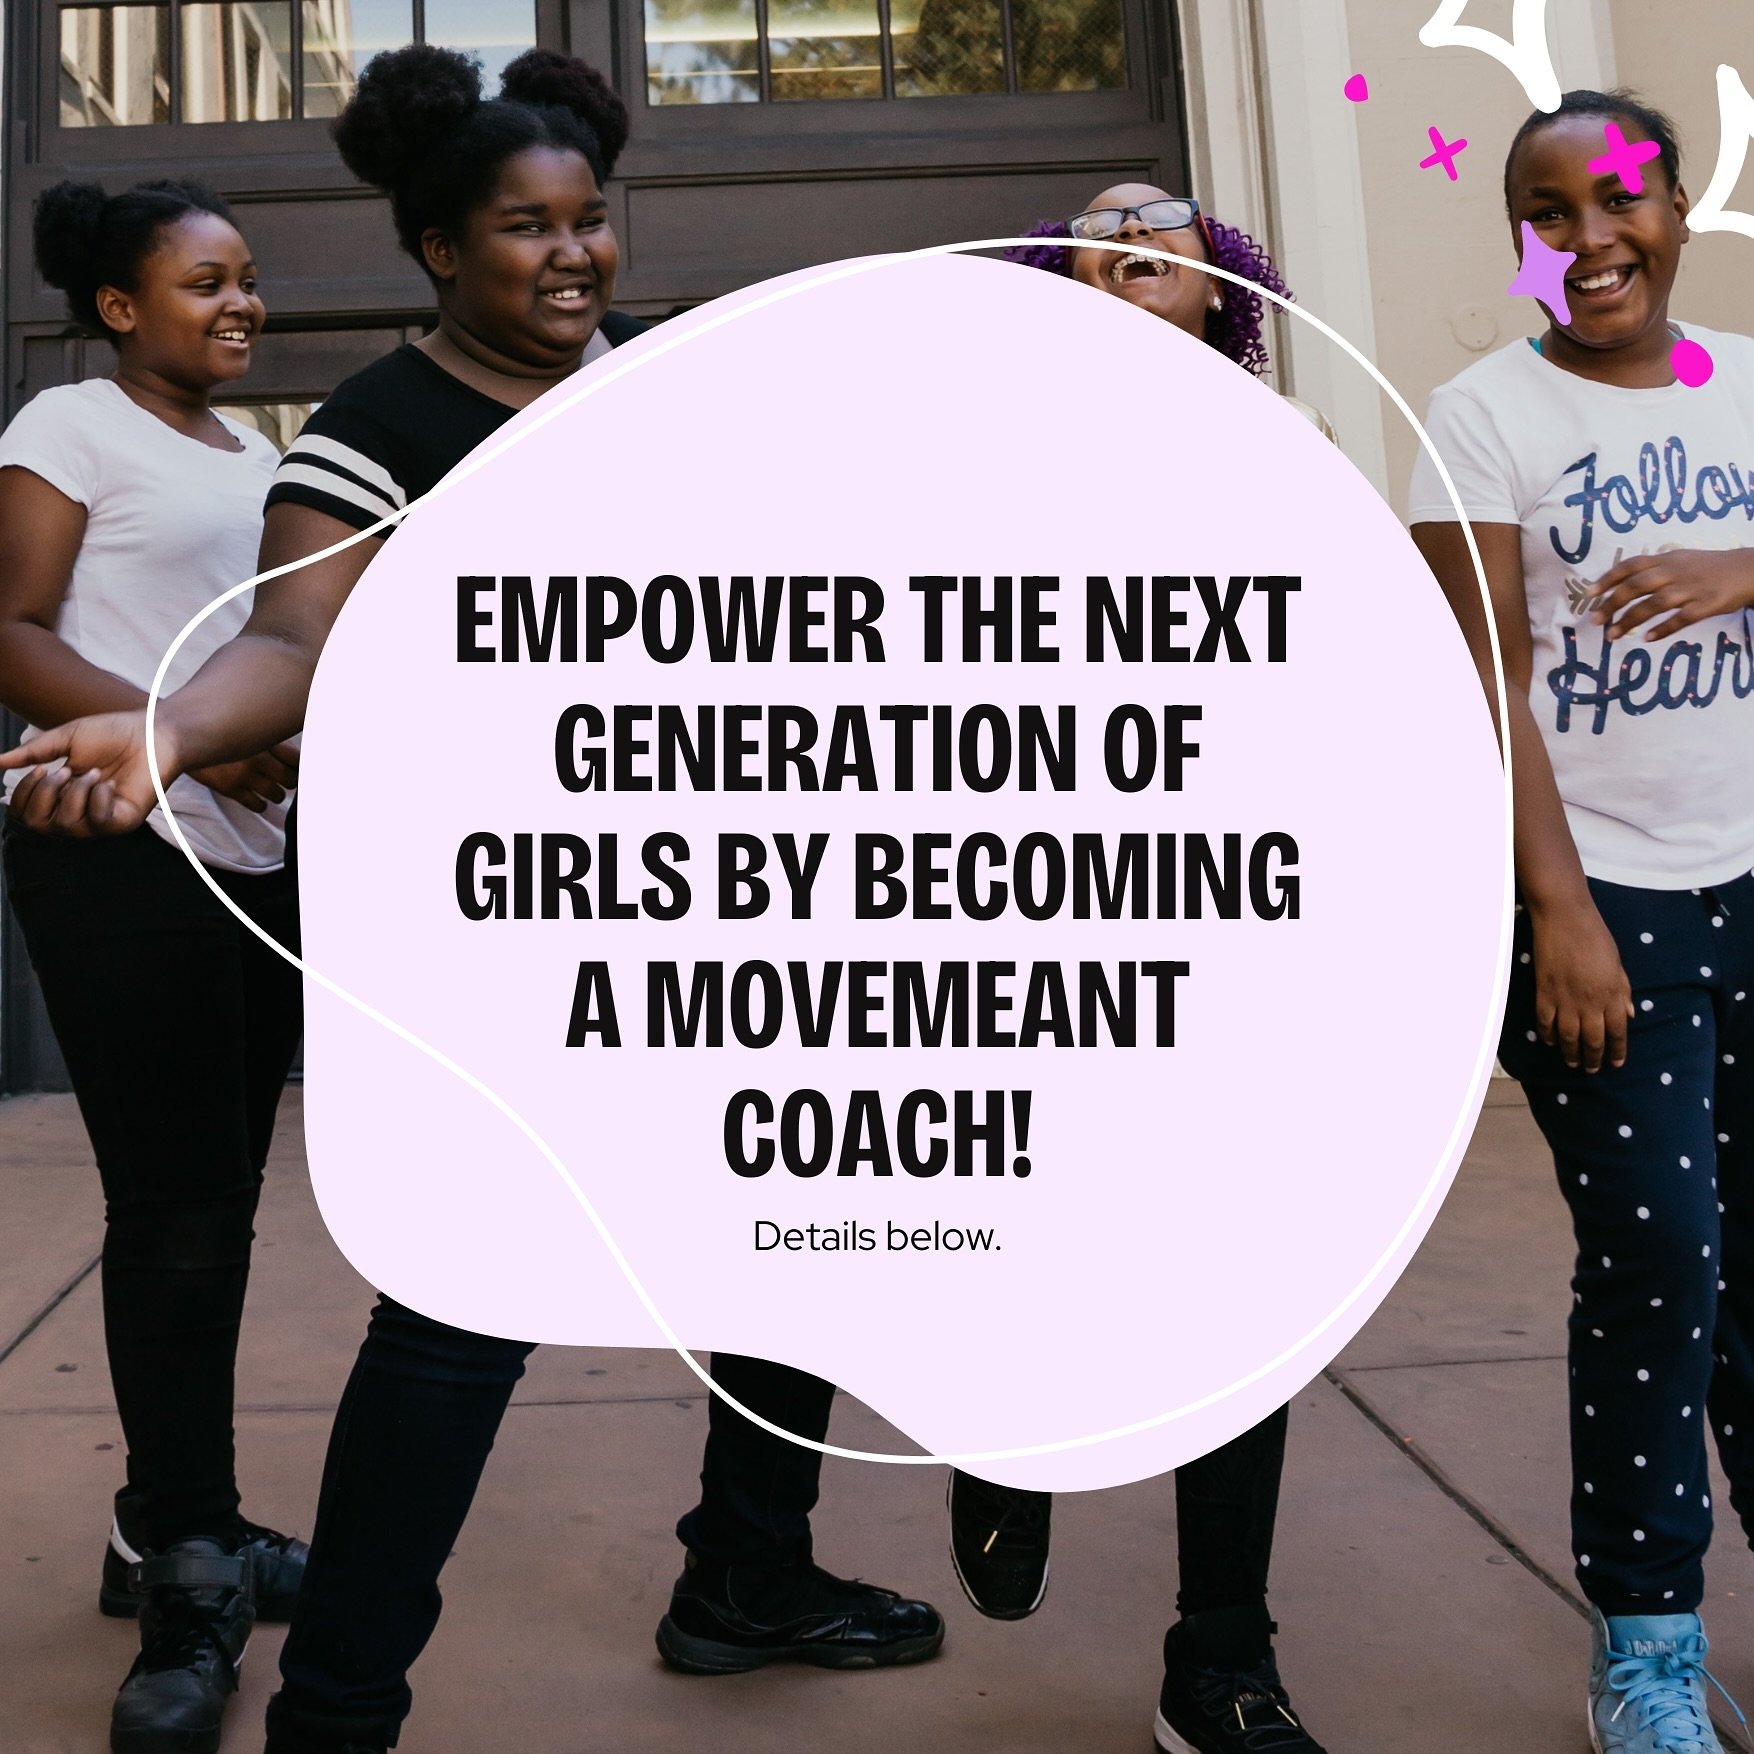 Ready to make a difference? Become a Movemeant coach and be part of something truly extraordinary!
 
Movemeant&rsquo;s Girl FWD virtual coaching program is your chance to empower girls aged 10-15, boosting their confidence, self-belief, and self-assu